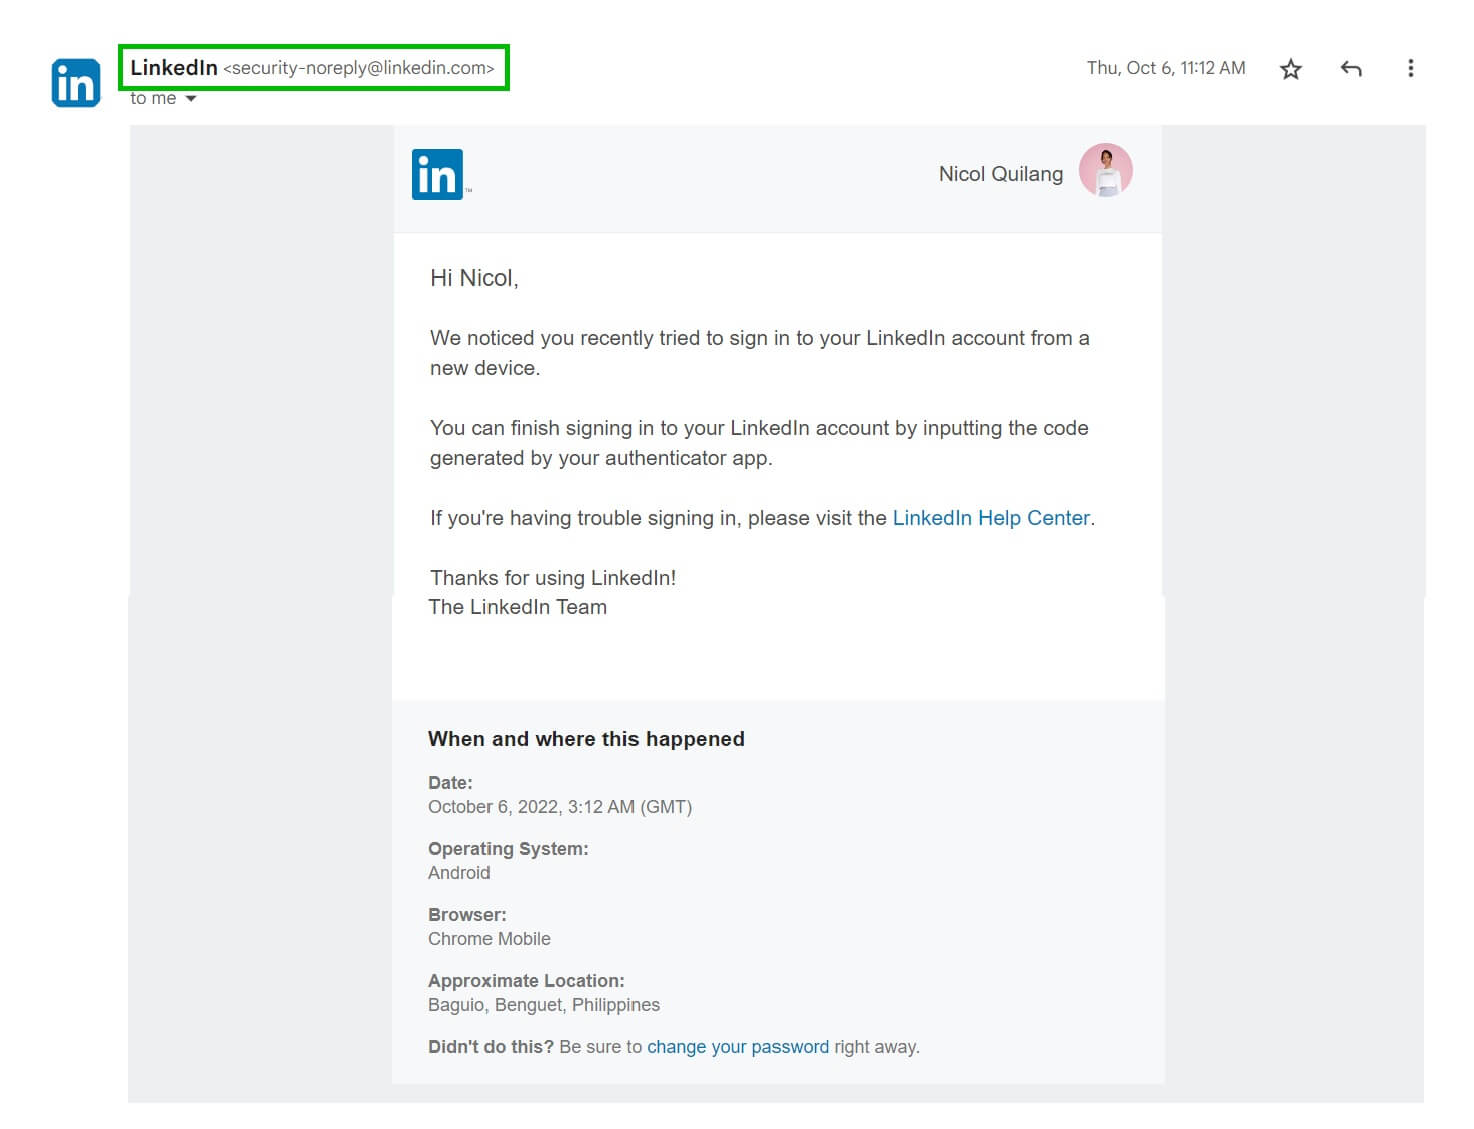 No-reply email from LinkedIn